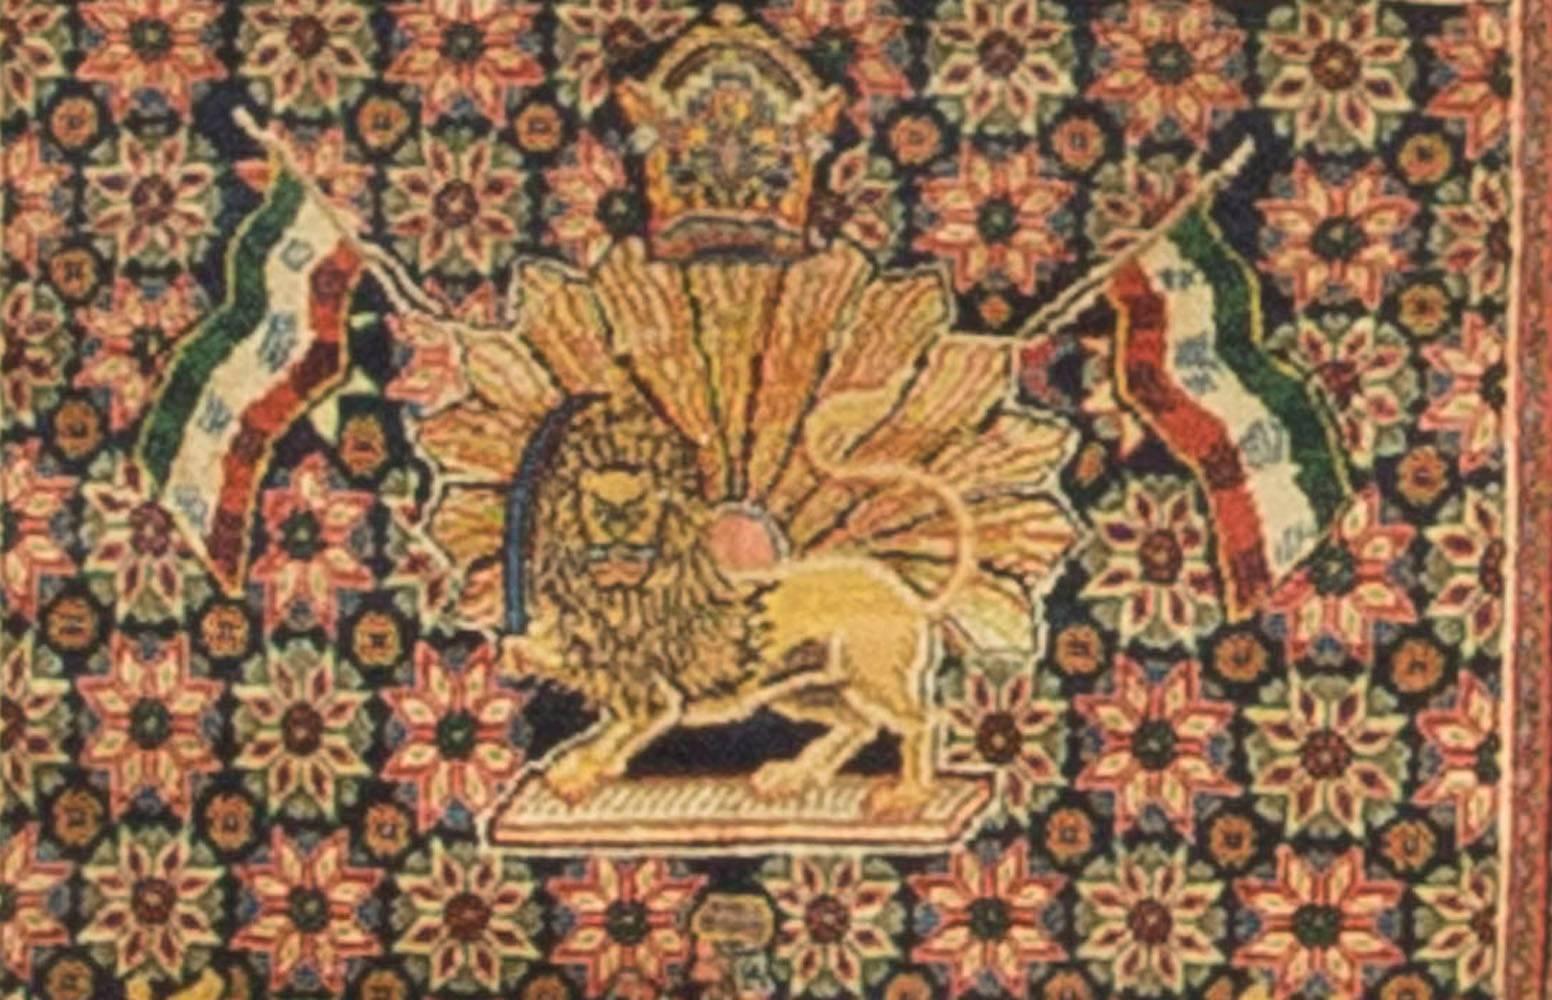 An antique Persian Kazvin rug featuring the lion and sun motif that was the best known symbol of Iran up until the revolution in 1979. The flag of Iran appears either side of the sun and this representation appeared on the pre revolutionary flag.